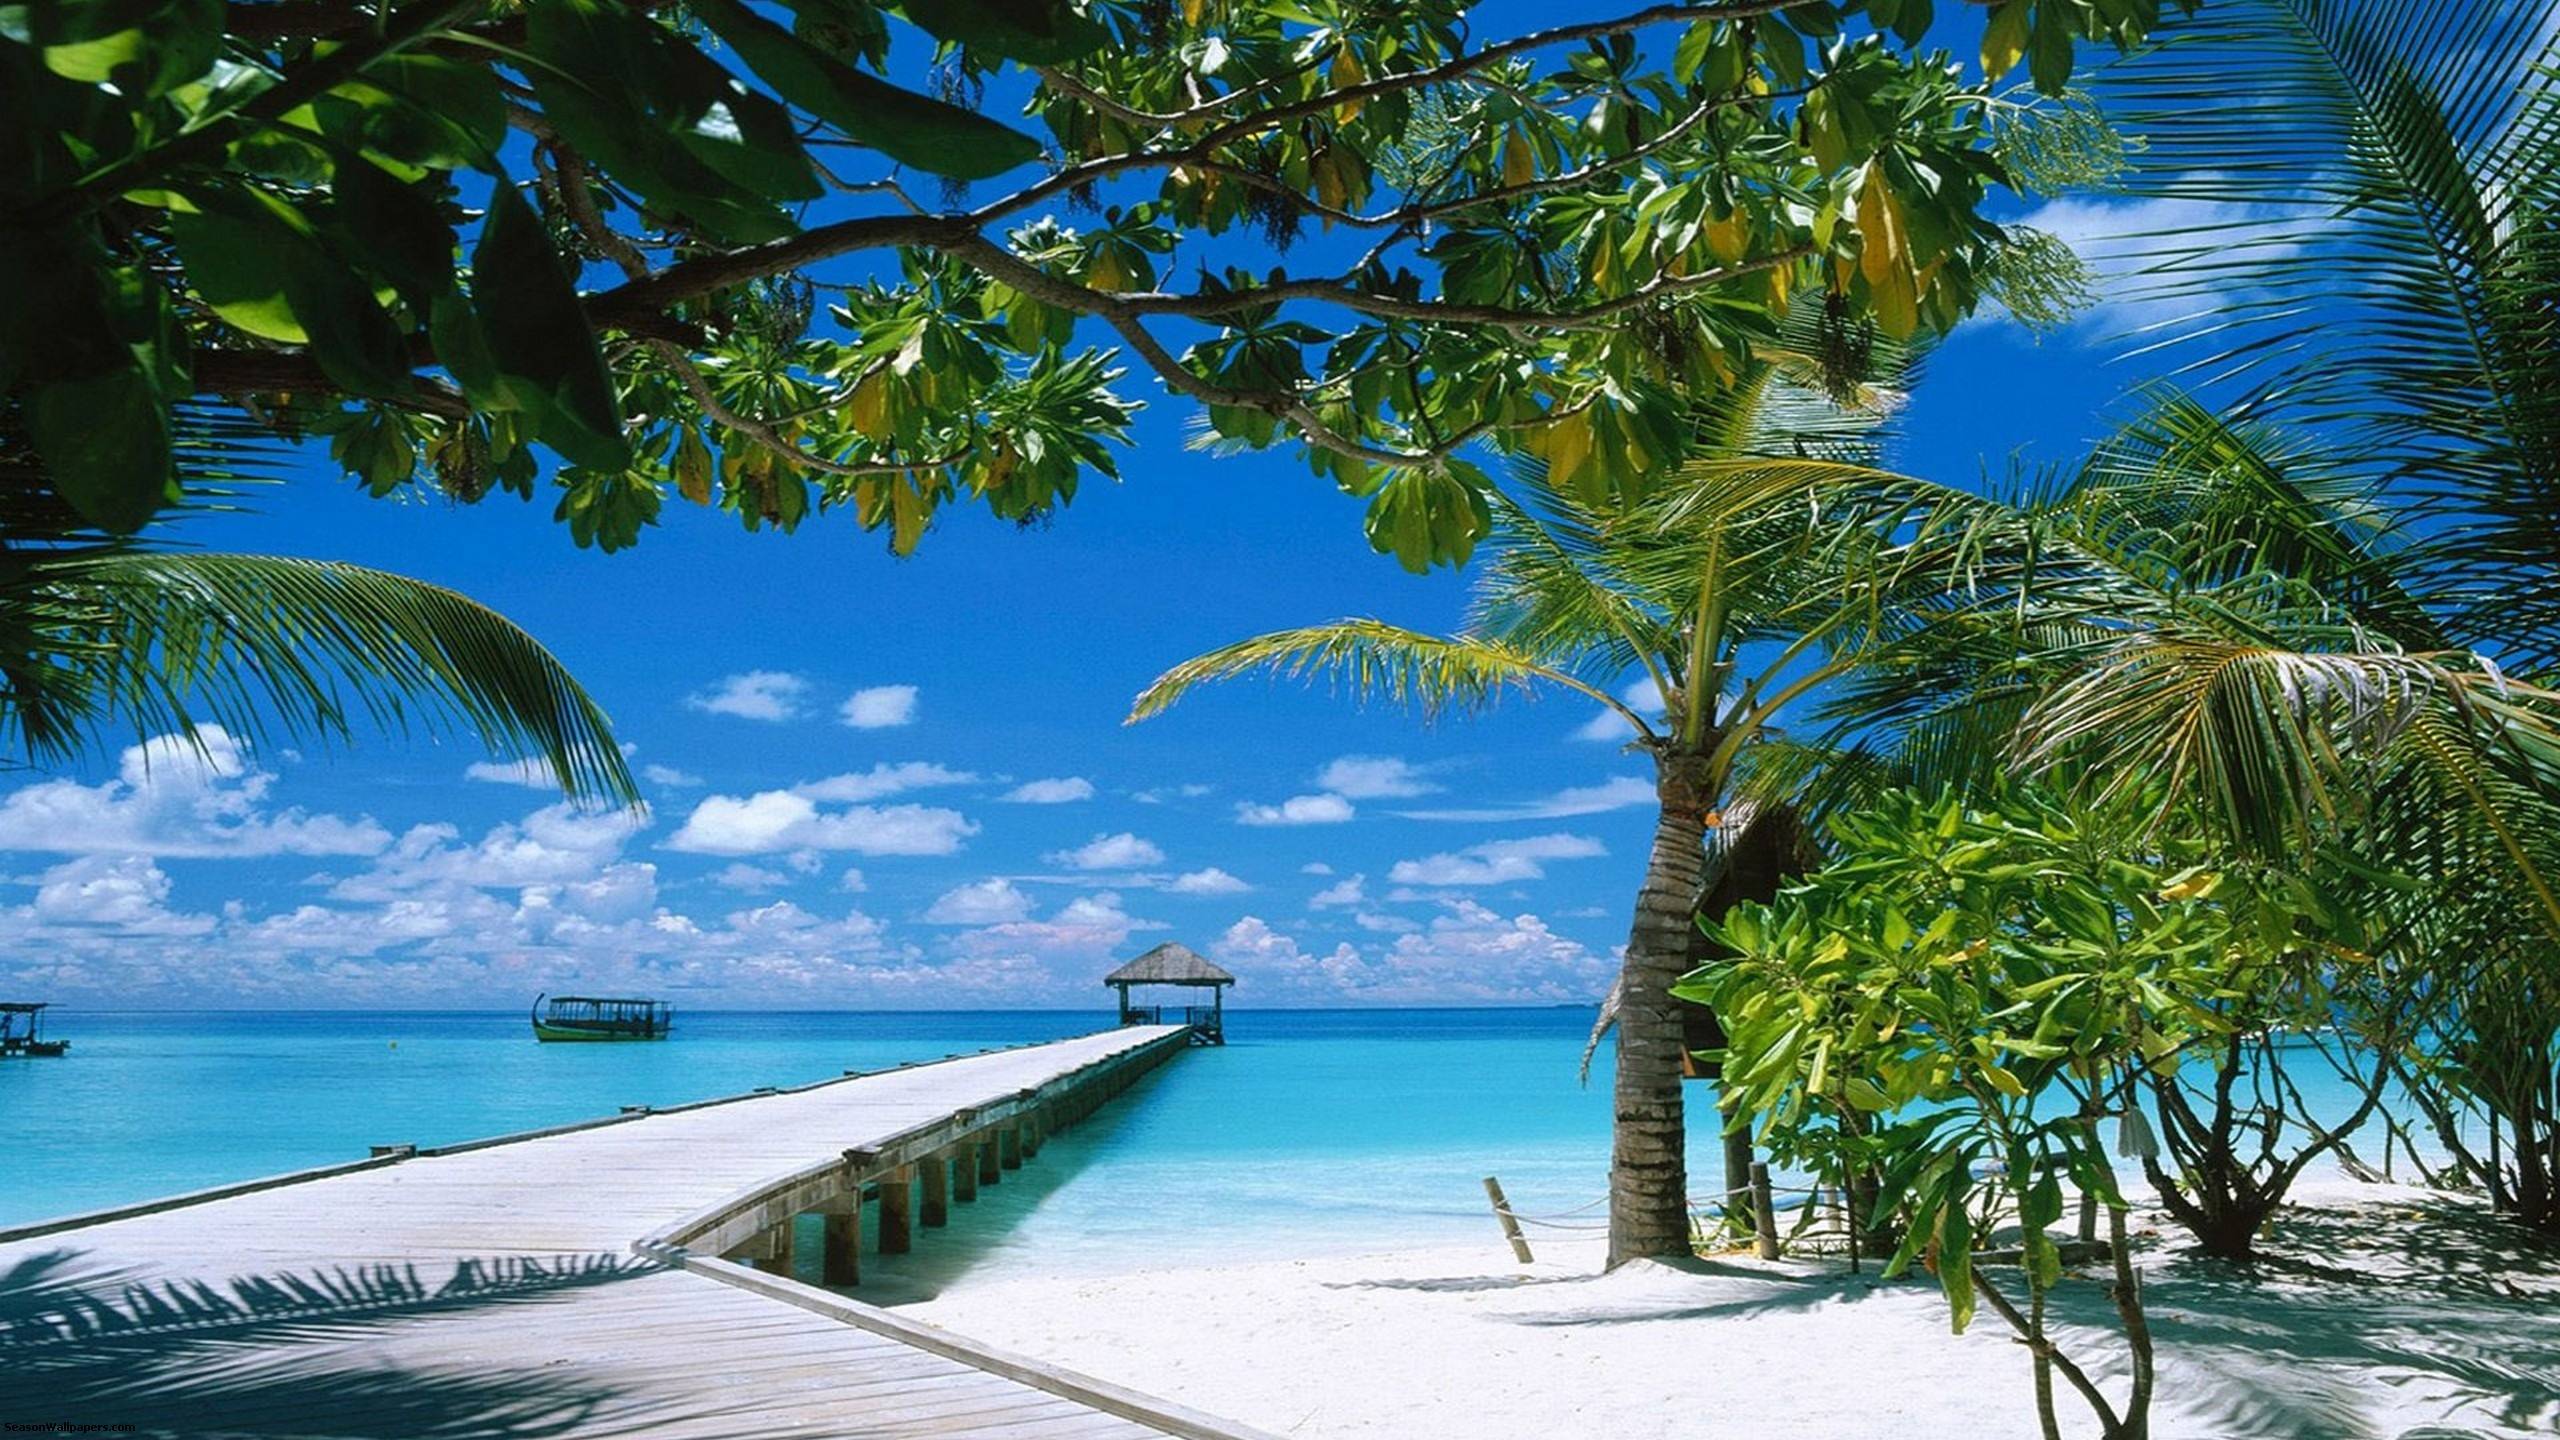 Wallpaper 2560x1440 azur sea with palm trees and a long dais